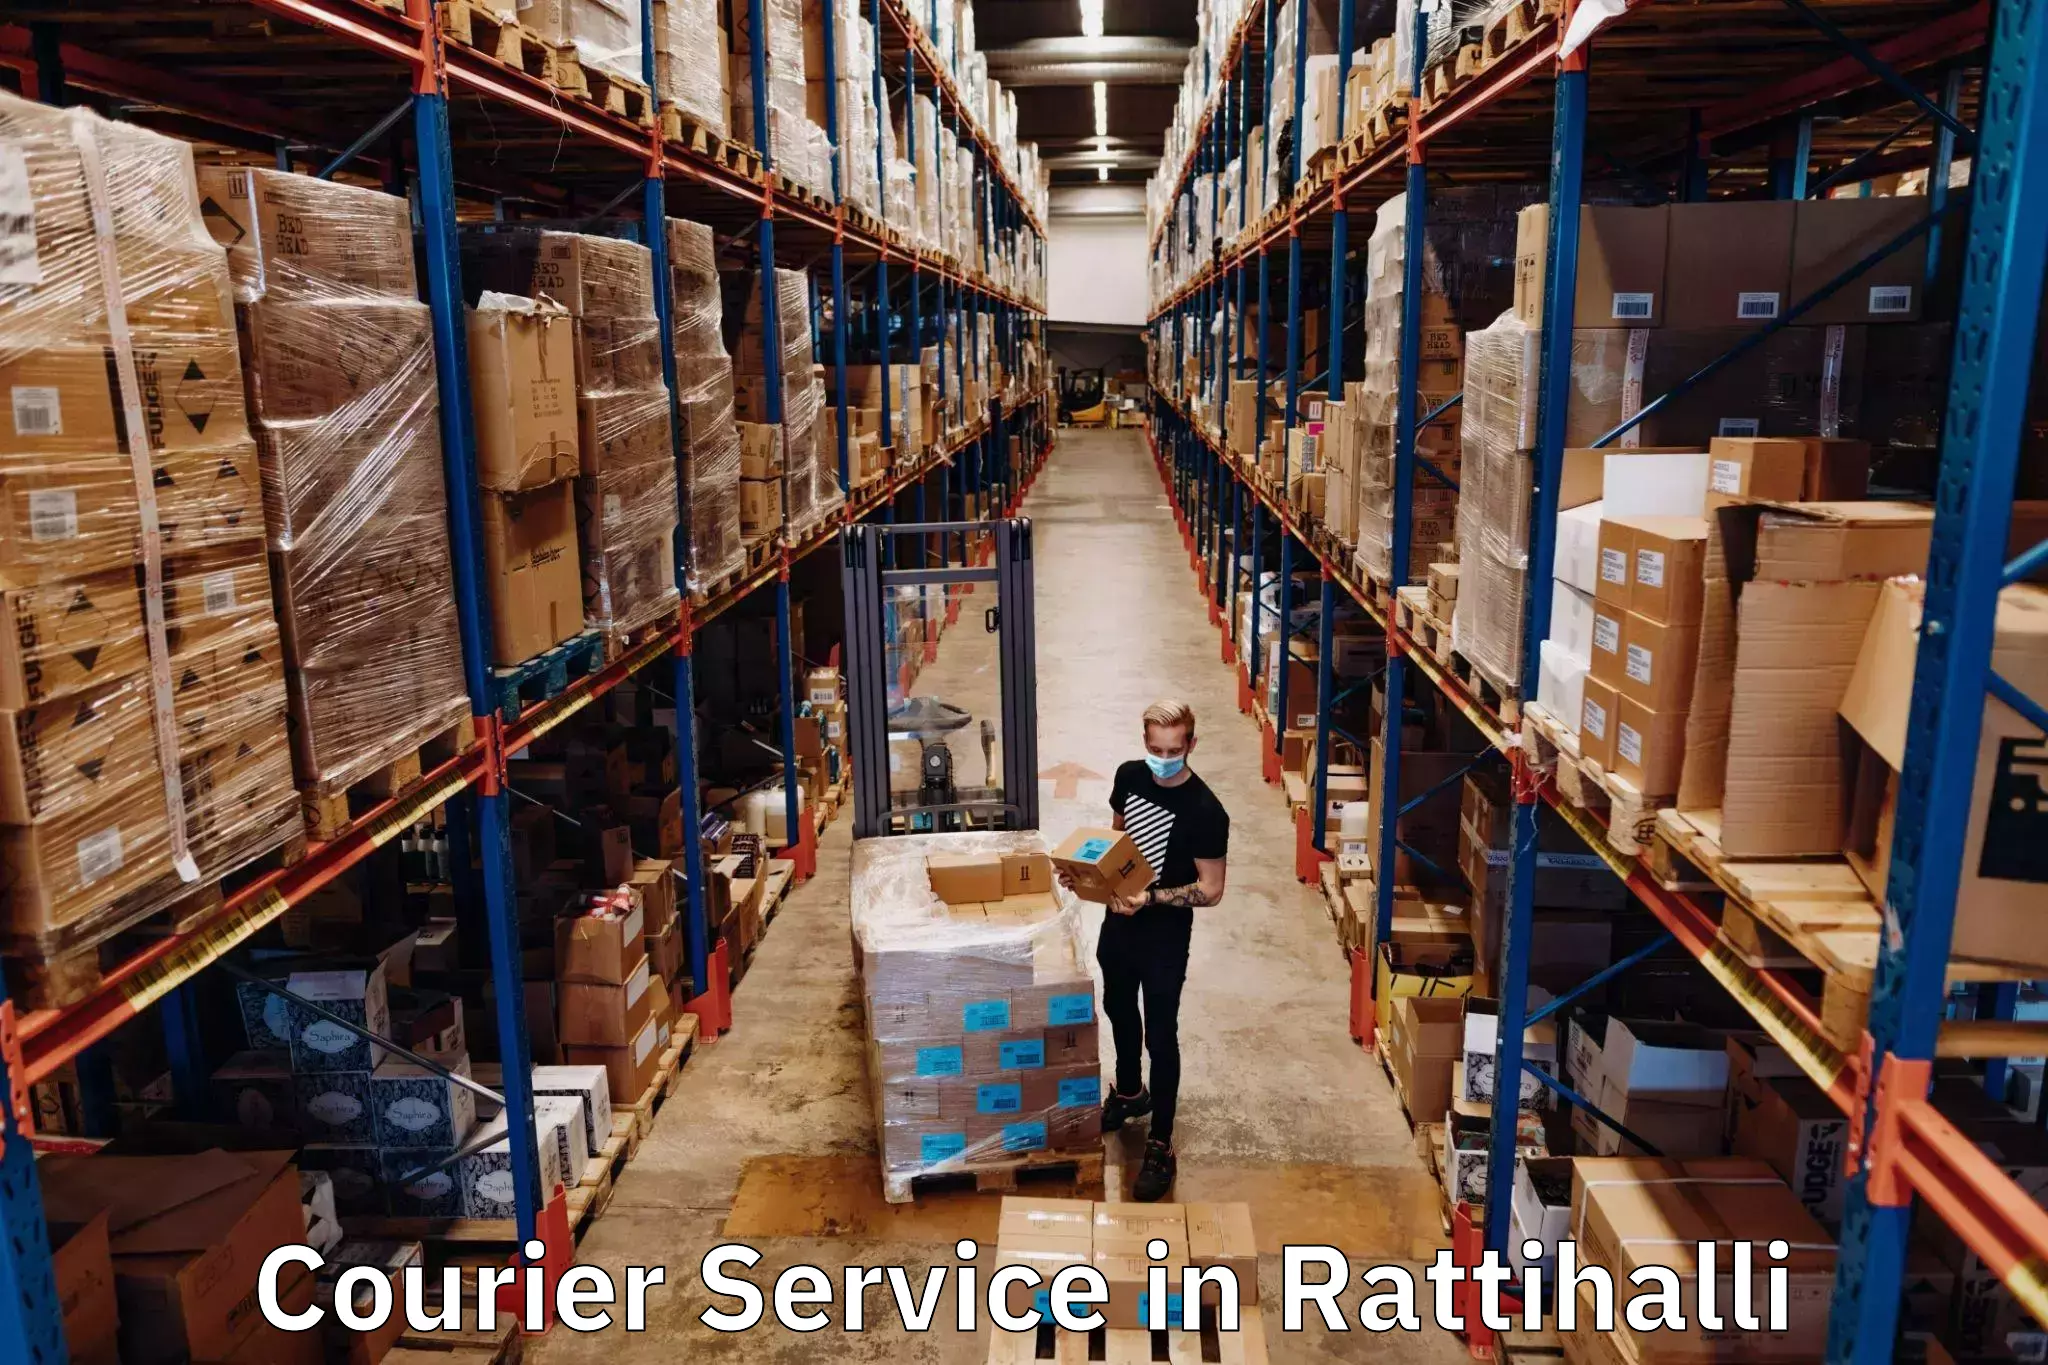 Online package tracking in Rattihalli